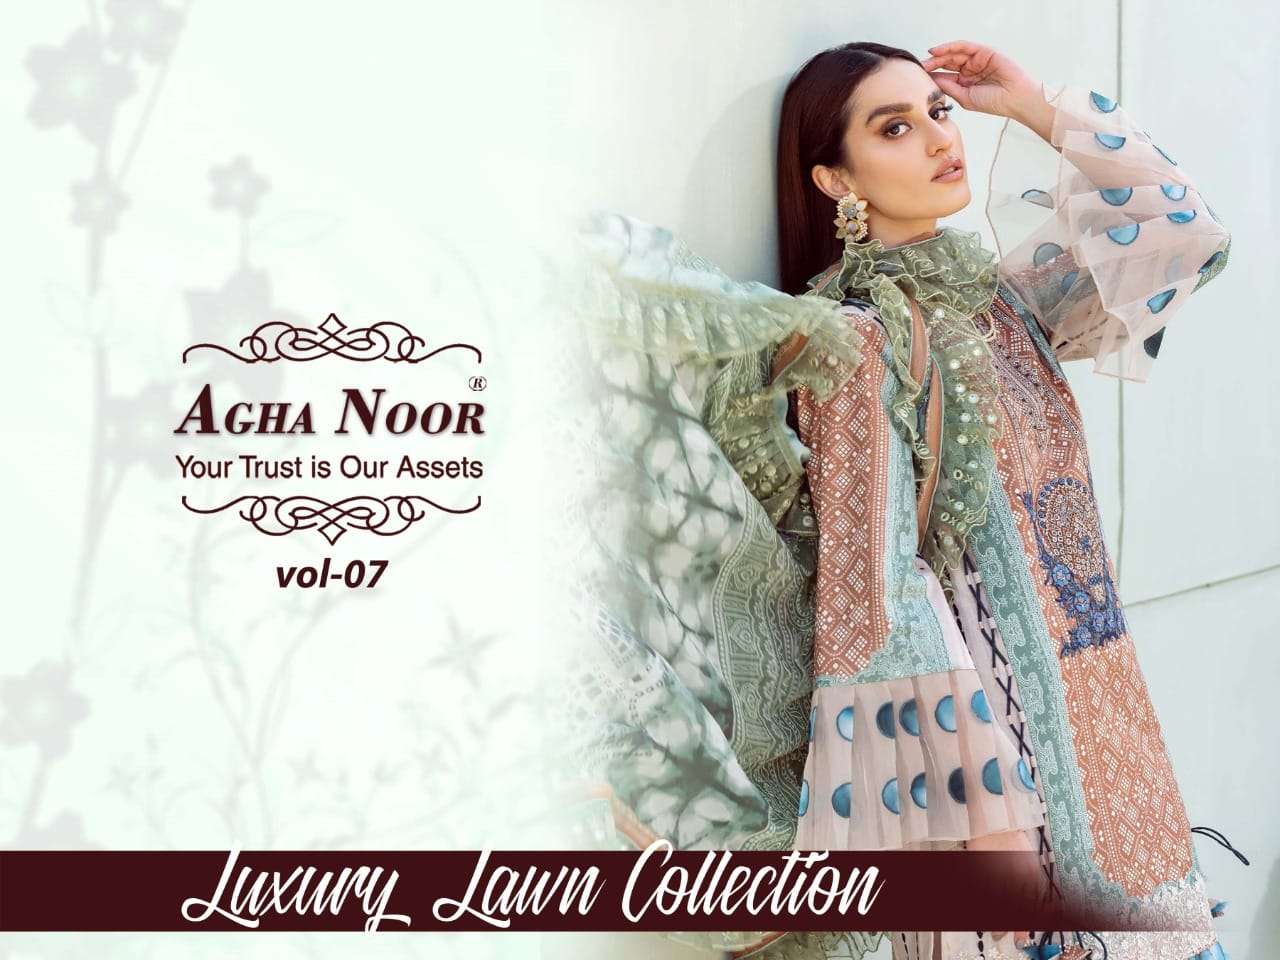 Agha Noor Luxury Lawn Collection vol 7 Lawn cotton With fanc...